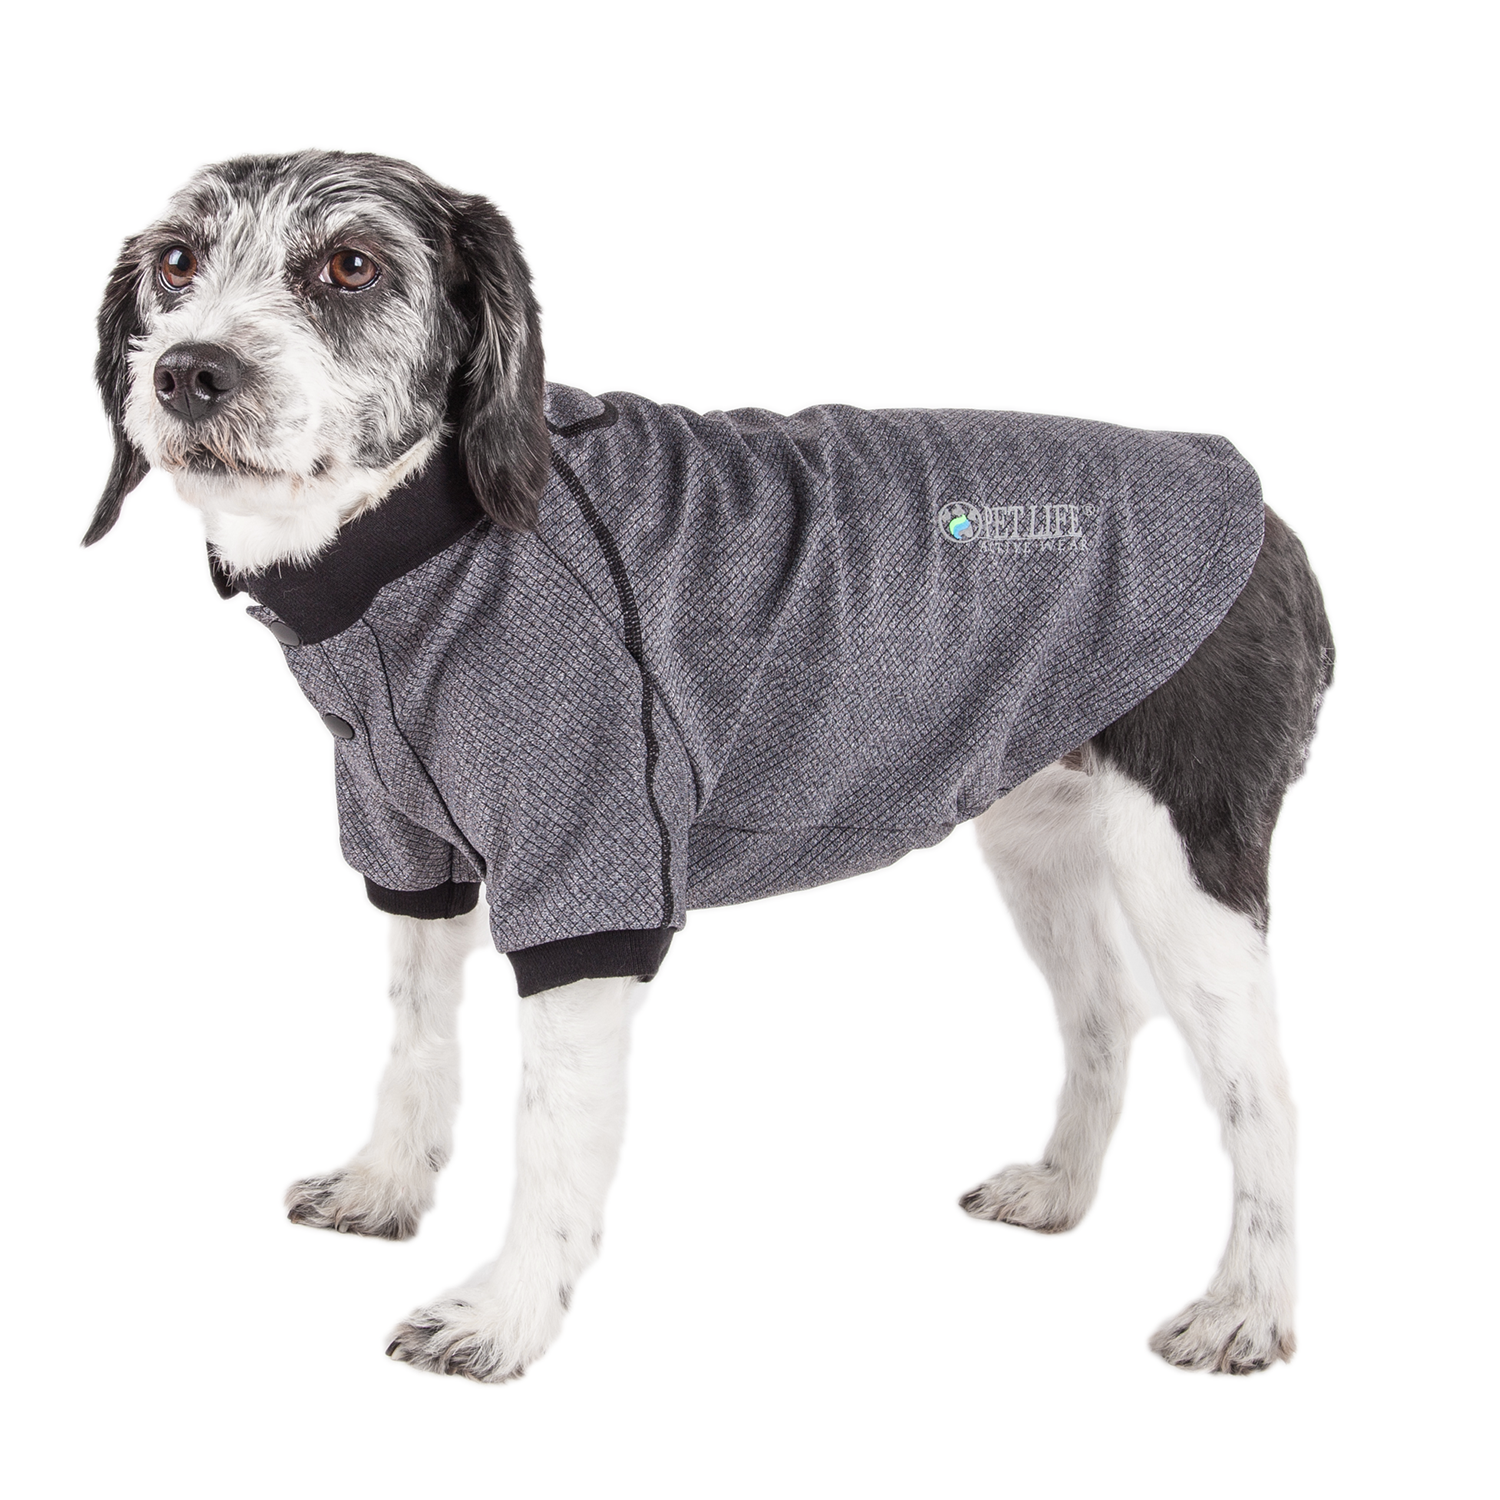  Louie de Coton Sun Shirt for Dogs & Cats, Size: XS, UV  Protection Cooling T-Shirt for Pets, UPF50+ Max Protection from Sunburn